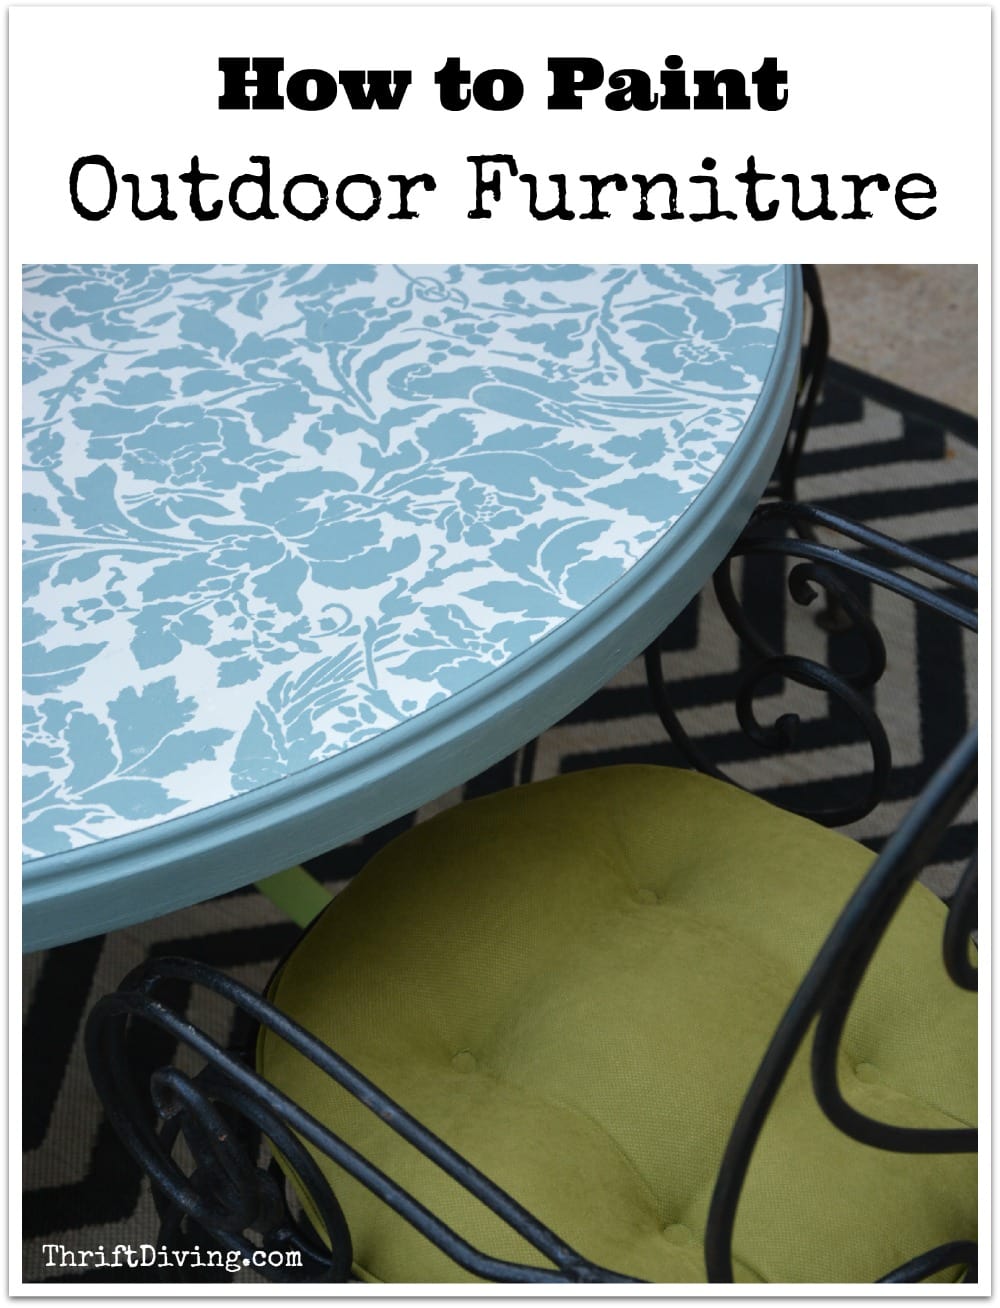 How to Paint Outdoor Furniture - Thrift Diving Blog